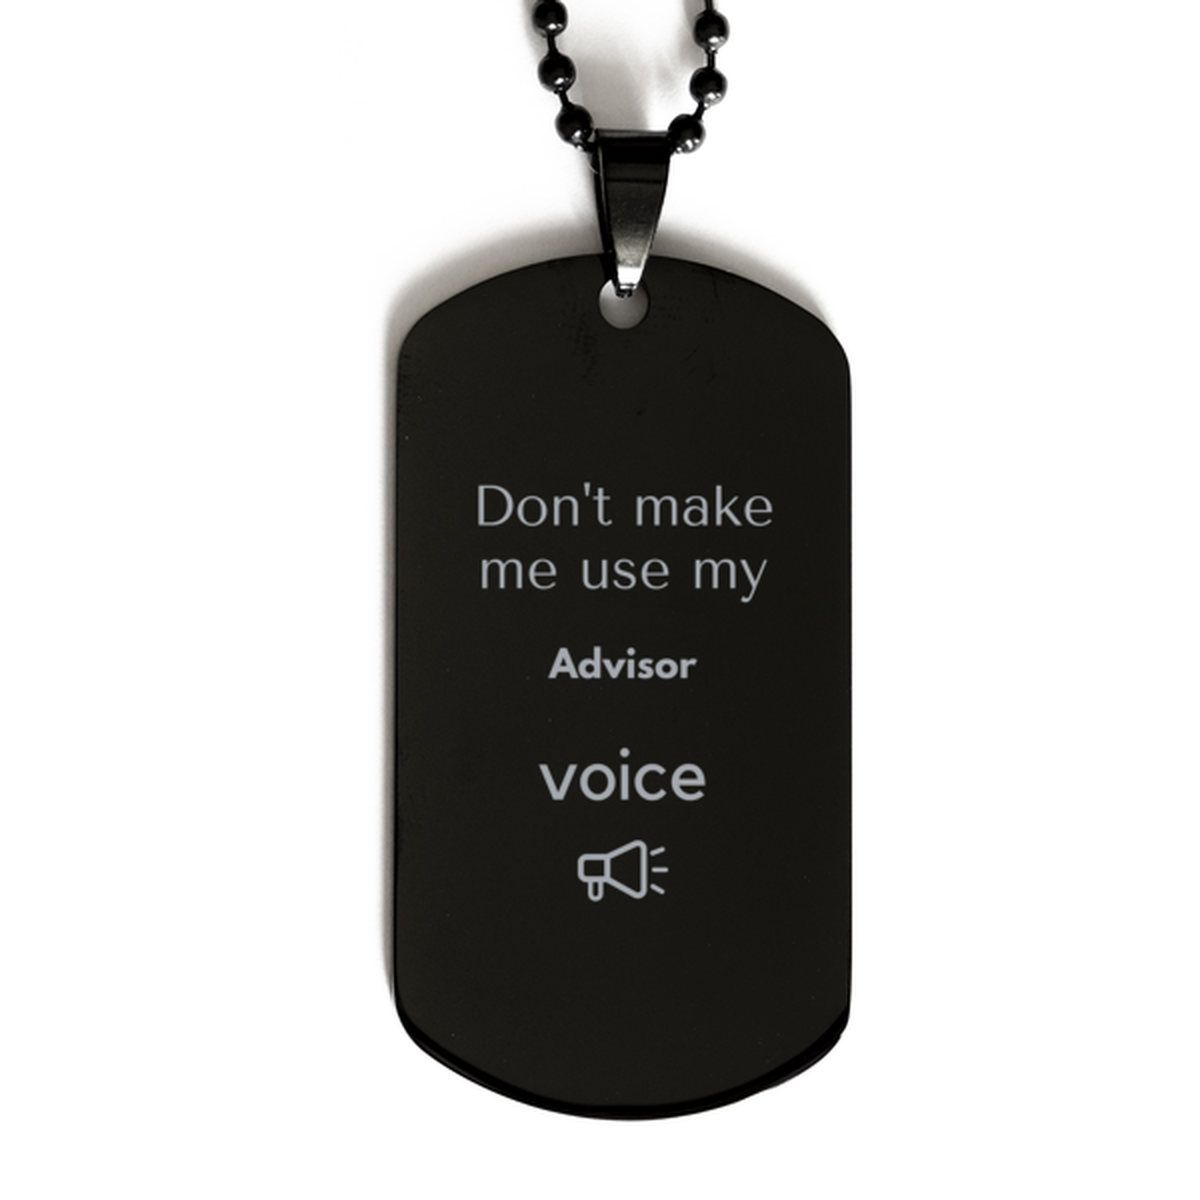 Don't make me use my Advisor voice, Sarcasm Advisor Gifts, Christmas Advisor Black Dog Tag Birthday Unique Gifts For Advisor Coworkers, Men, Women, Colleague, Friends